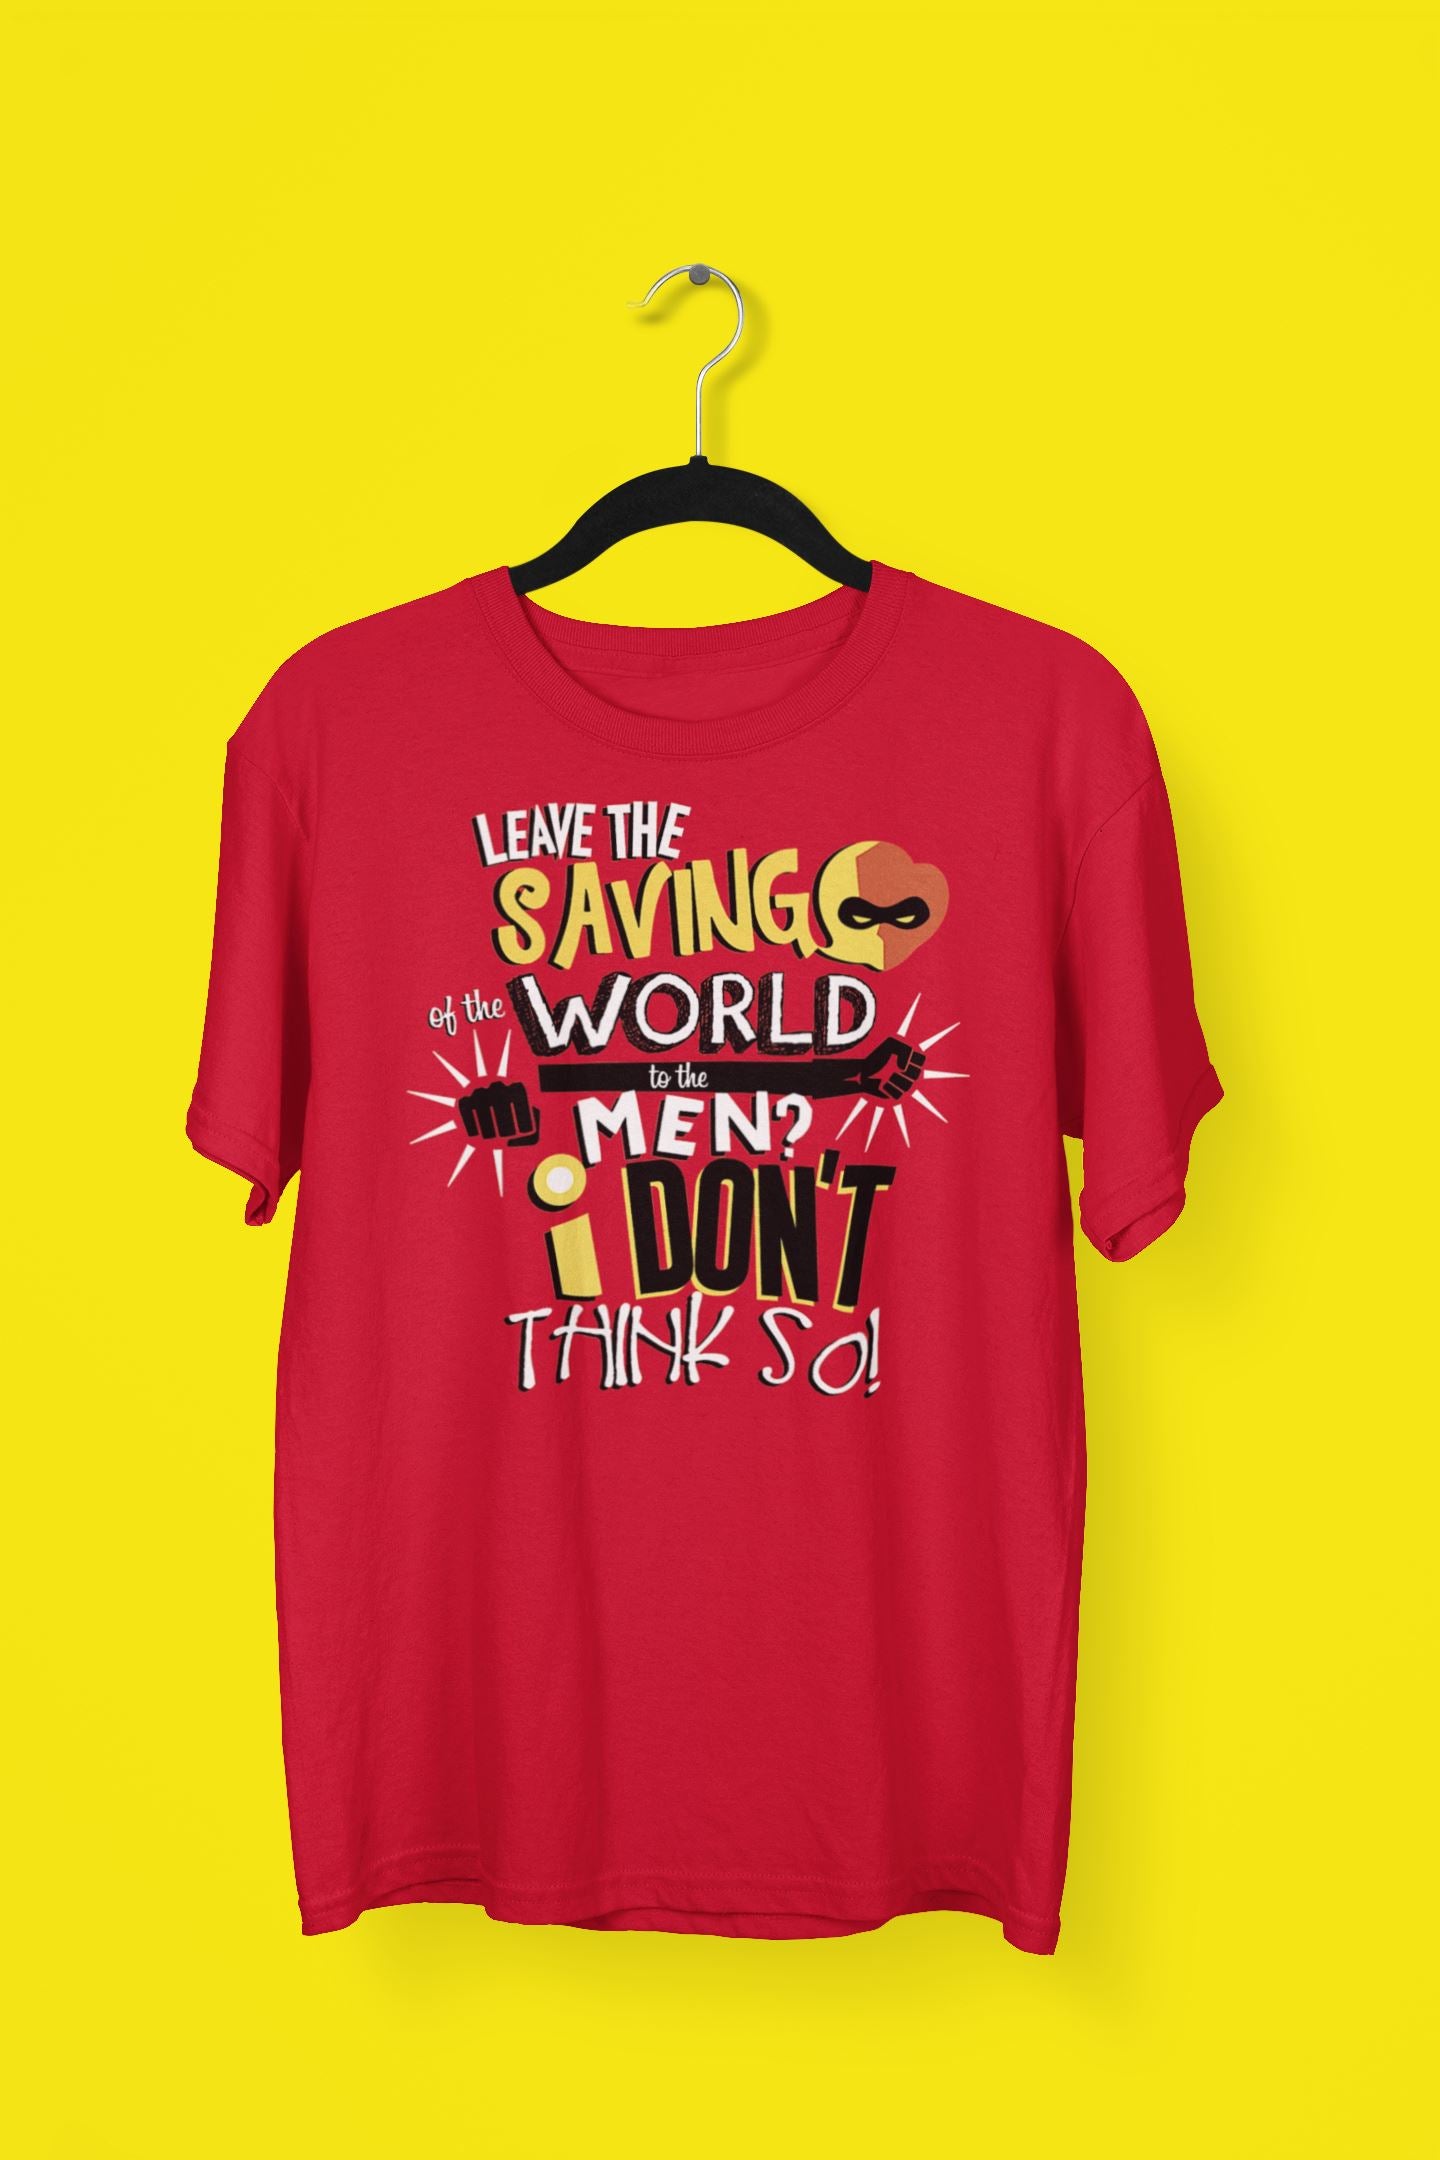 Leave the Saving of the World on Men I Don't Think So Funny Red T Shirt for Women freeshipping - Catch My Drift India